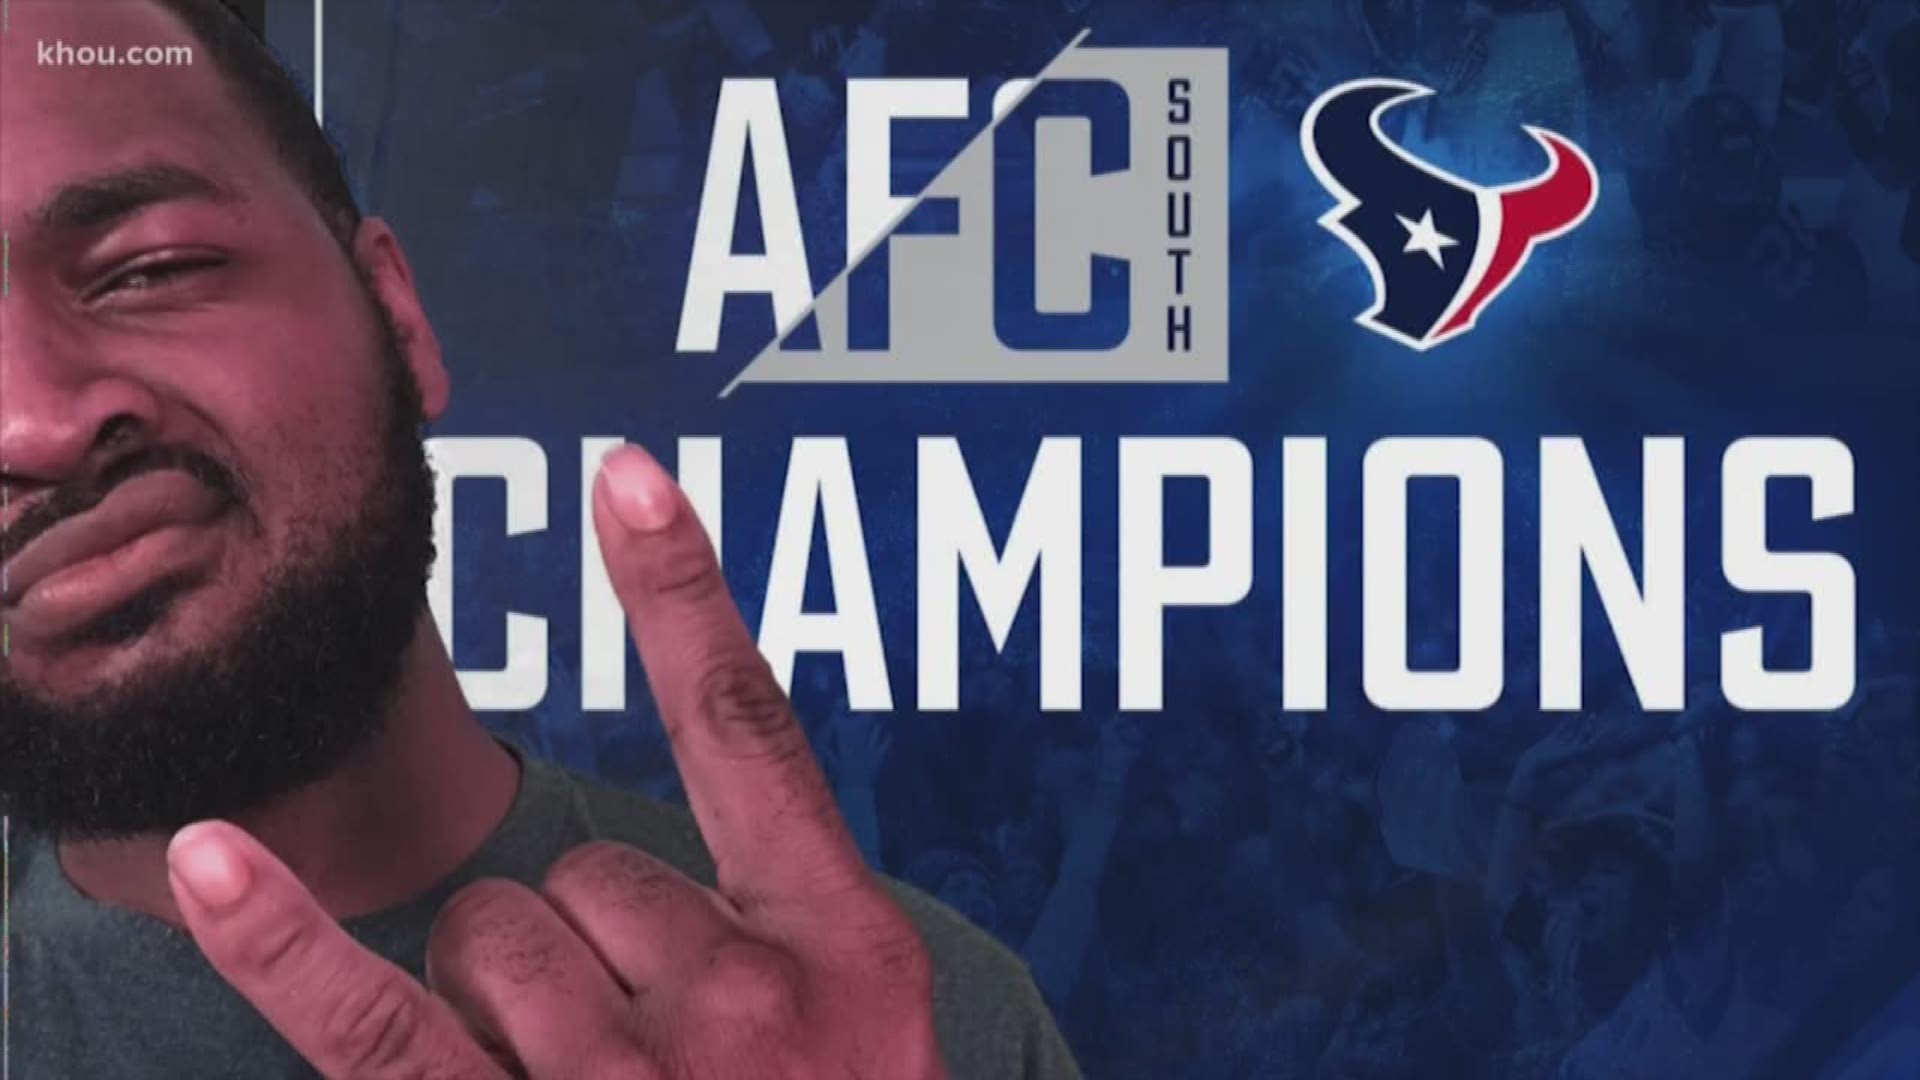 A division showdown! The Texans set to face the Colts in the wildcard round of the playoffs on Saturday. And the trash talking has already begun. Here's Monday Morning Quarterback, Chinedu Ogu.